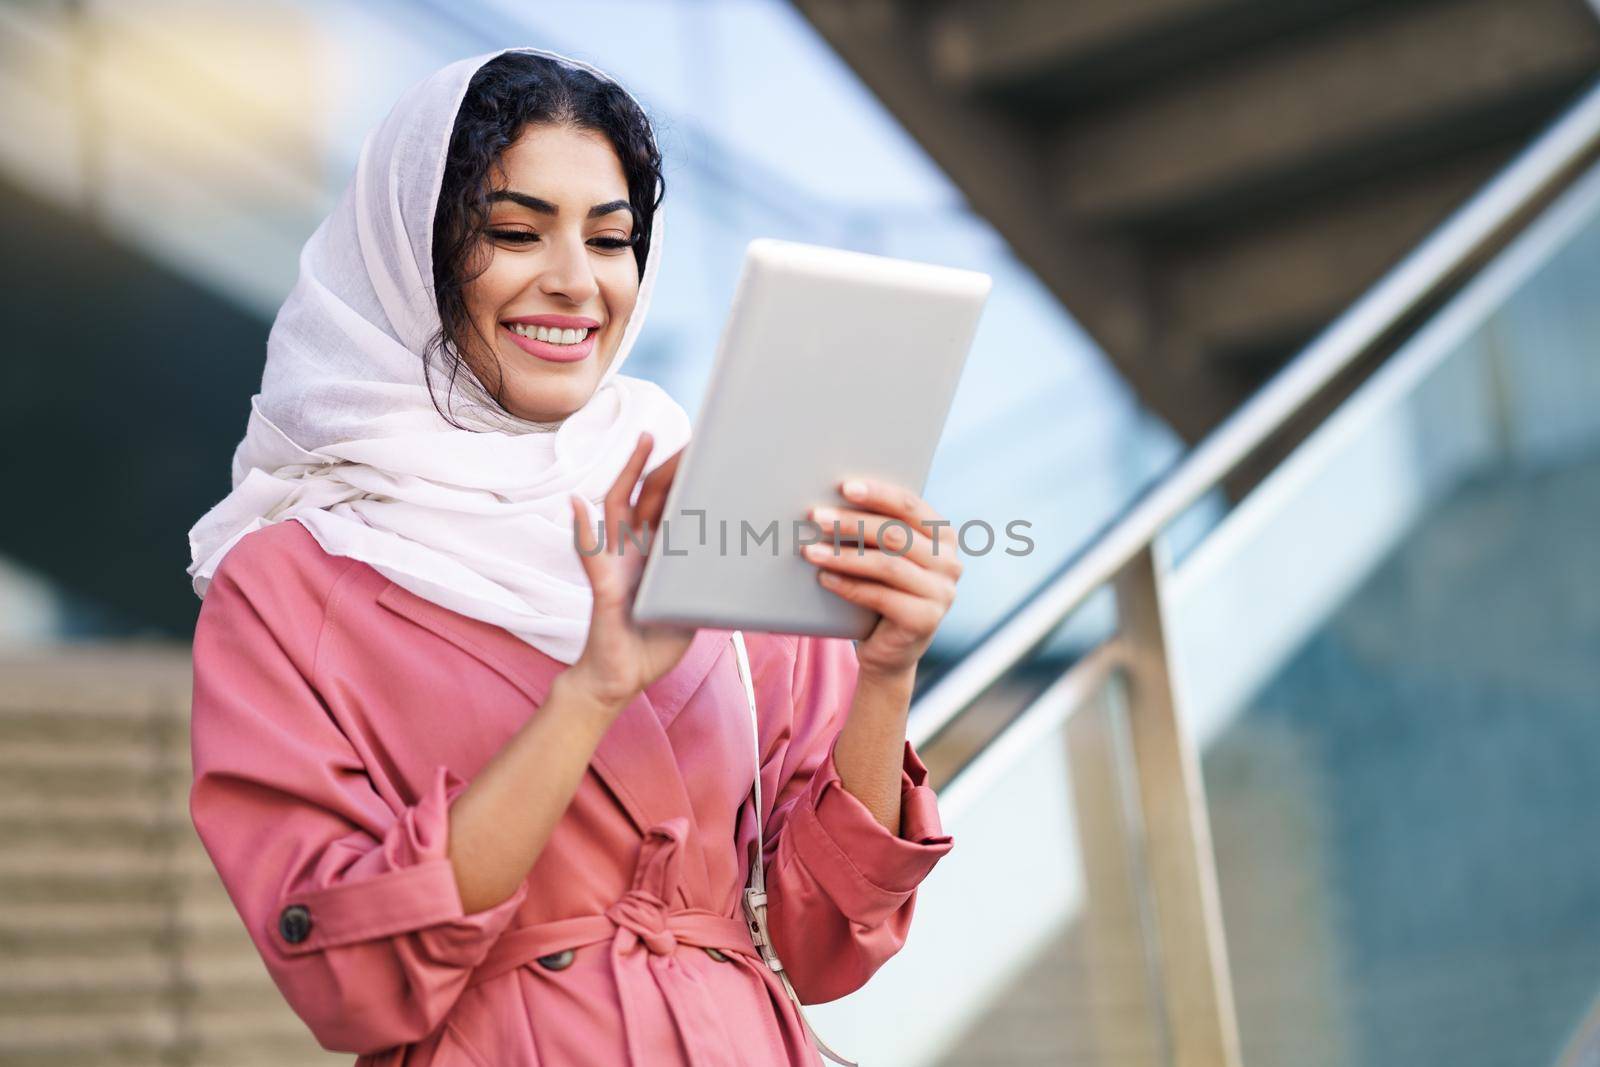 Young Arab woman wearing hijab headscarf using digital tablet in business environment